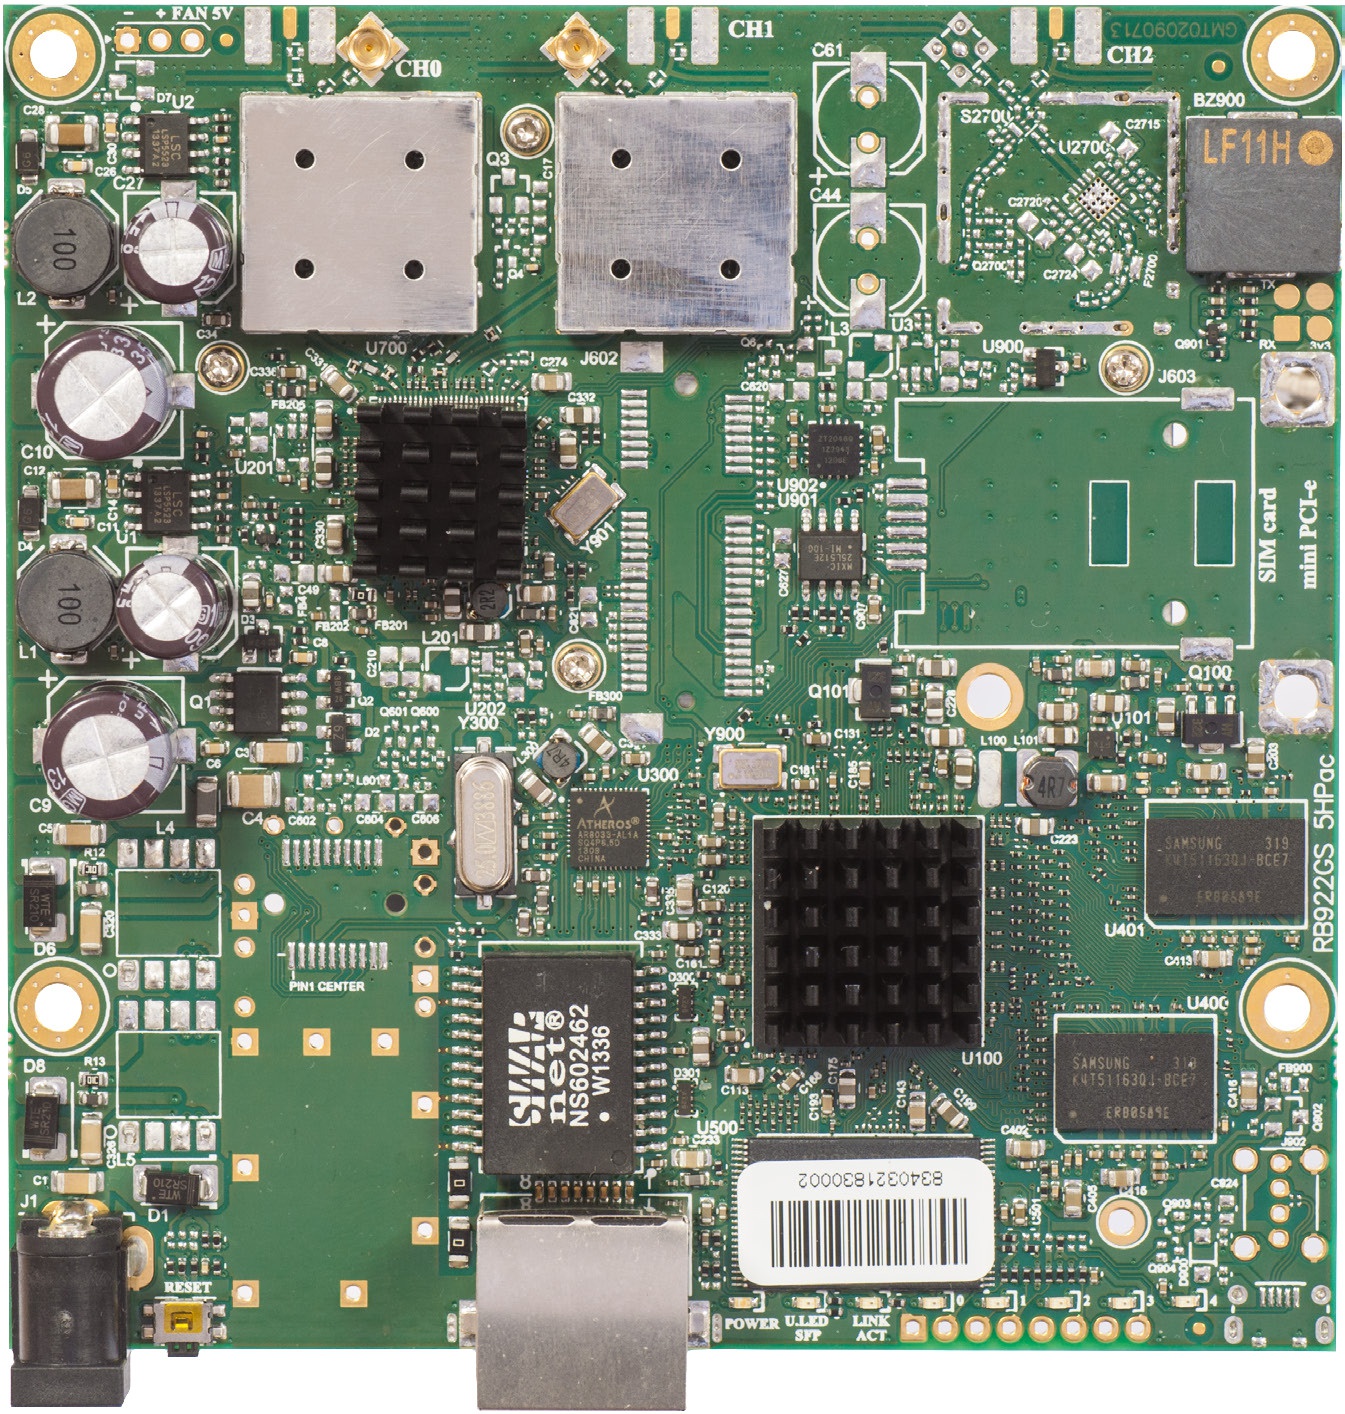 MikroTik RouterBOARD RB911G 5HPacD 802.11ac 866Mbps